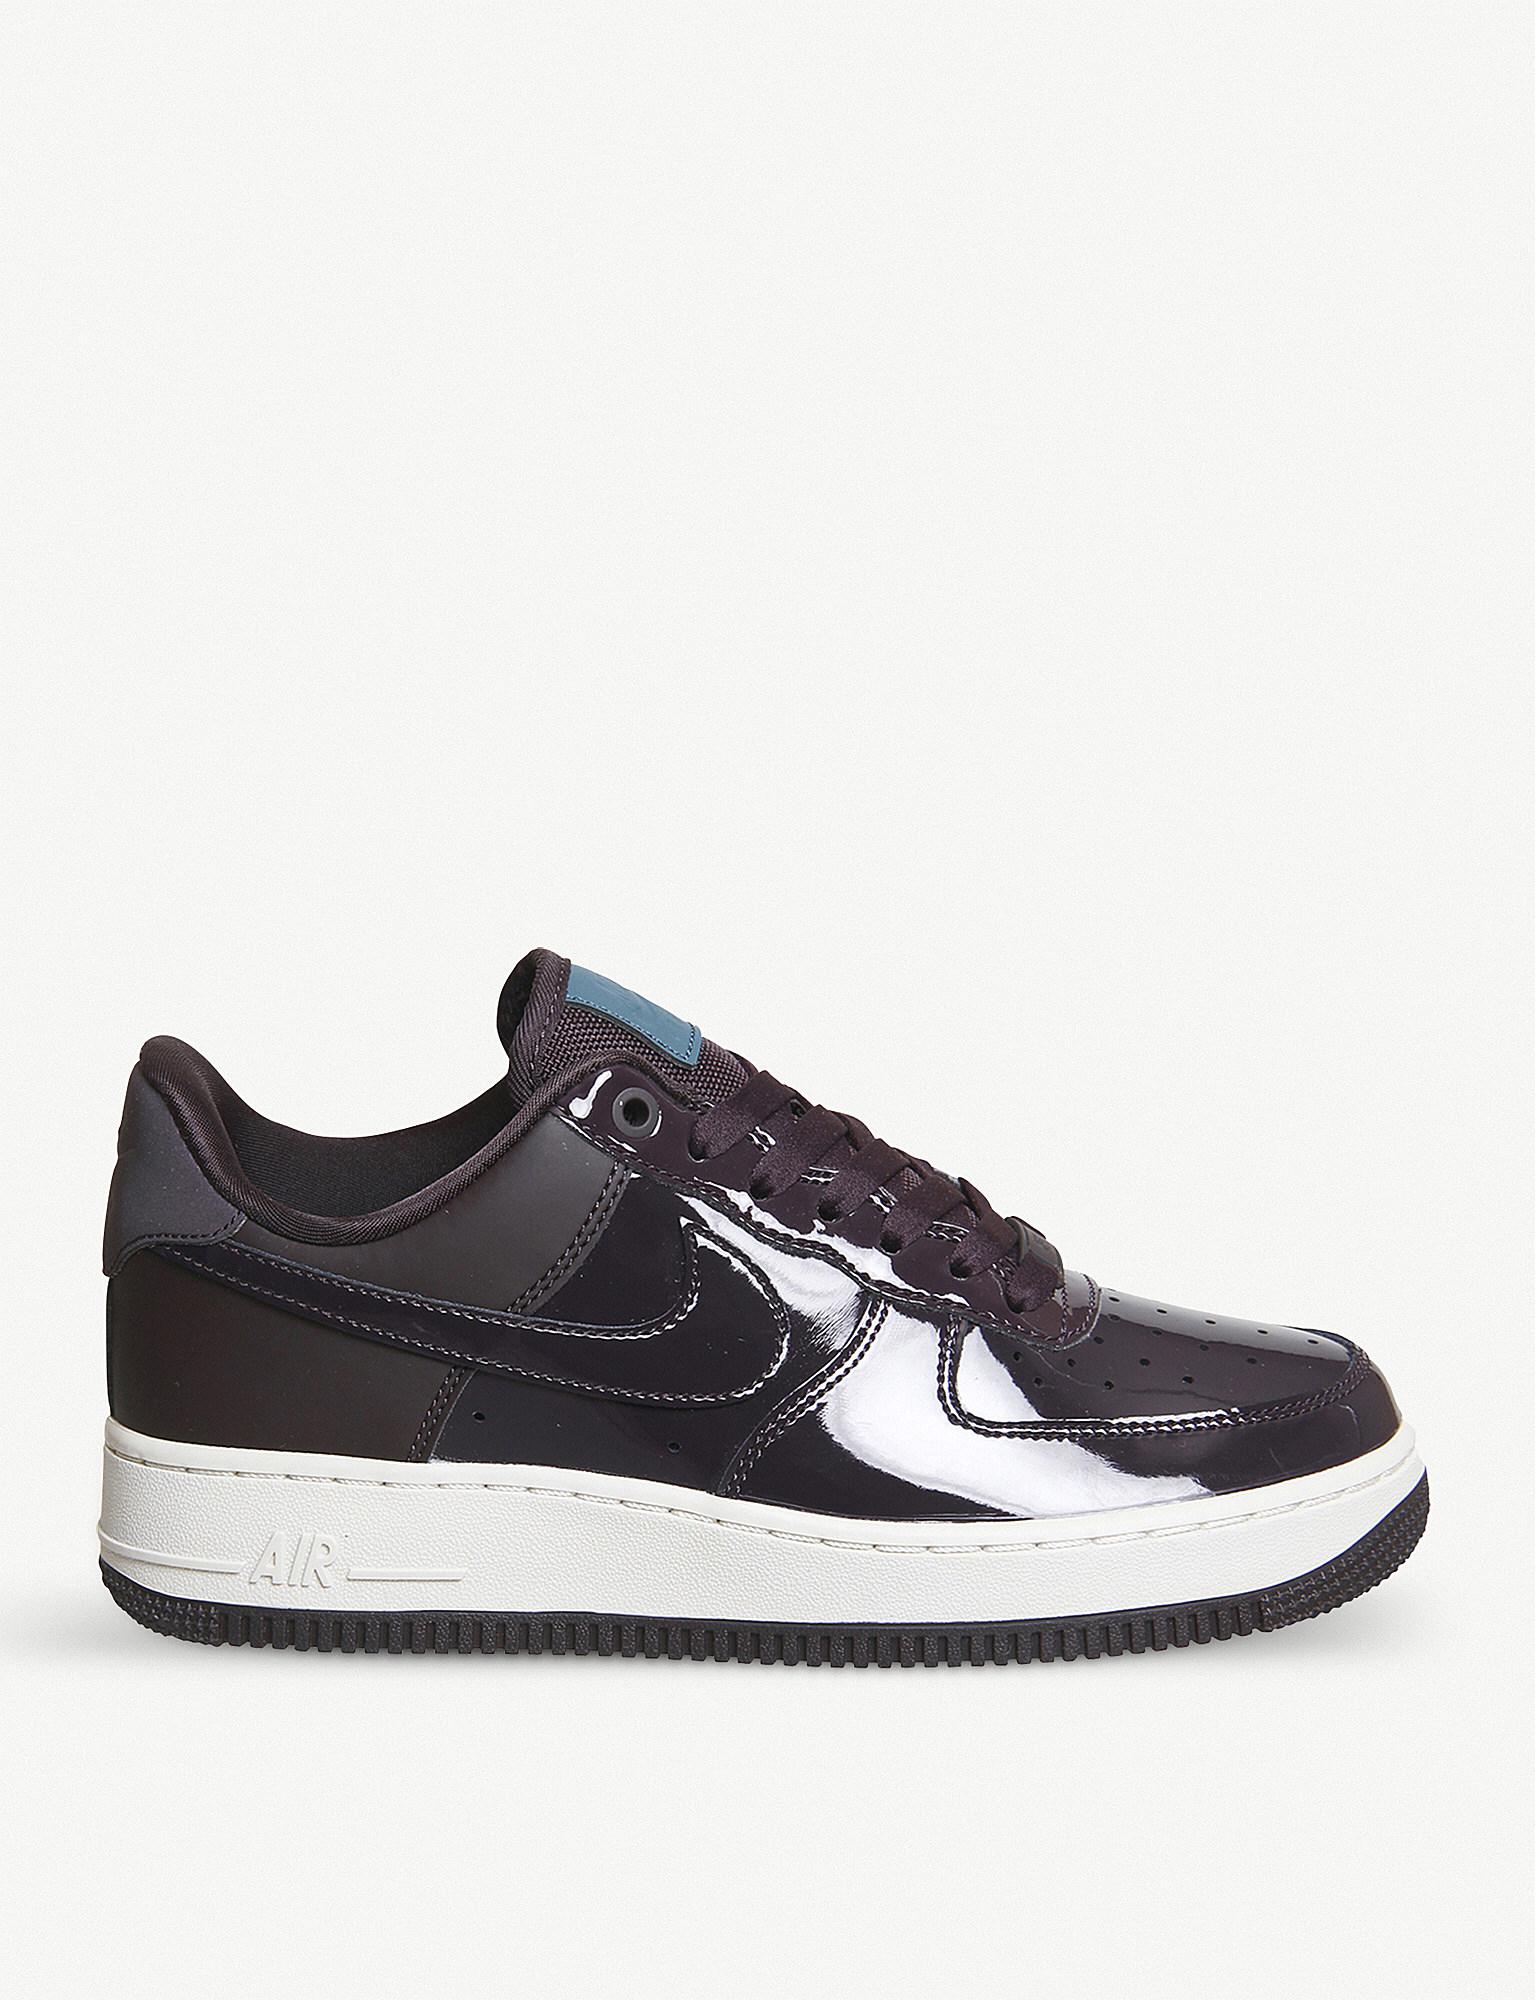 Nike Air Force 1 07 Patent Leather Trainers in Blue - Lyst